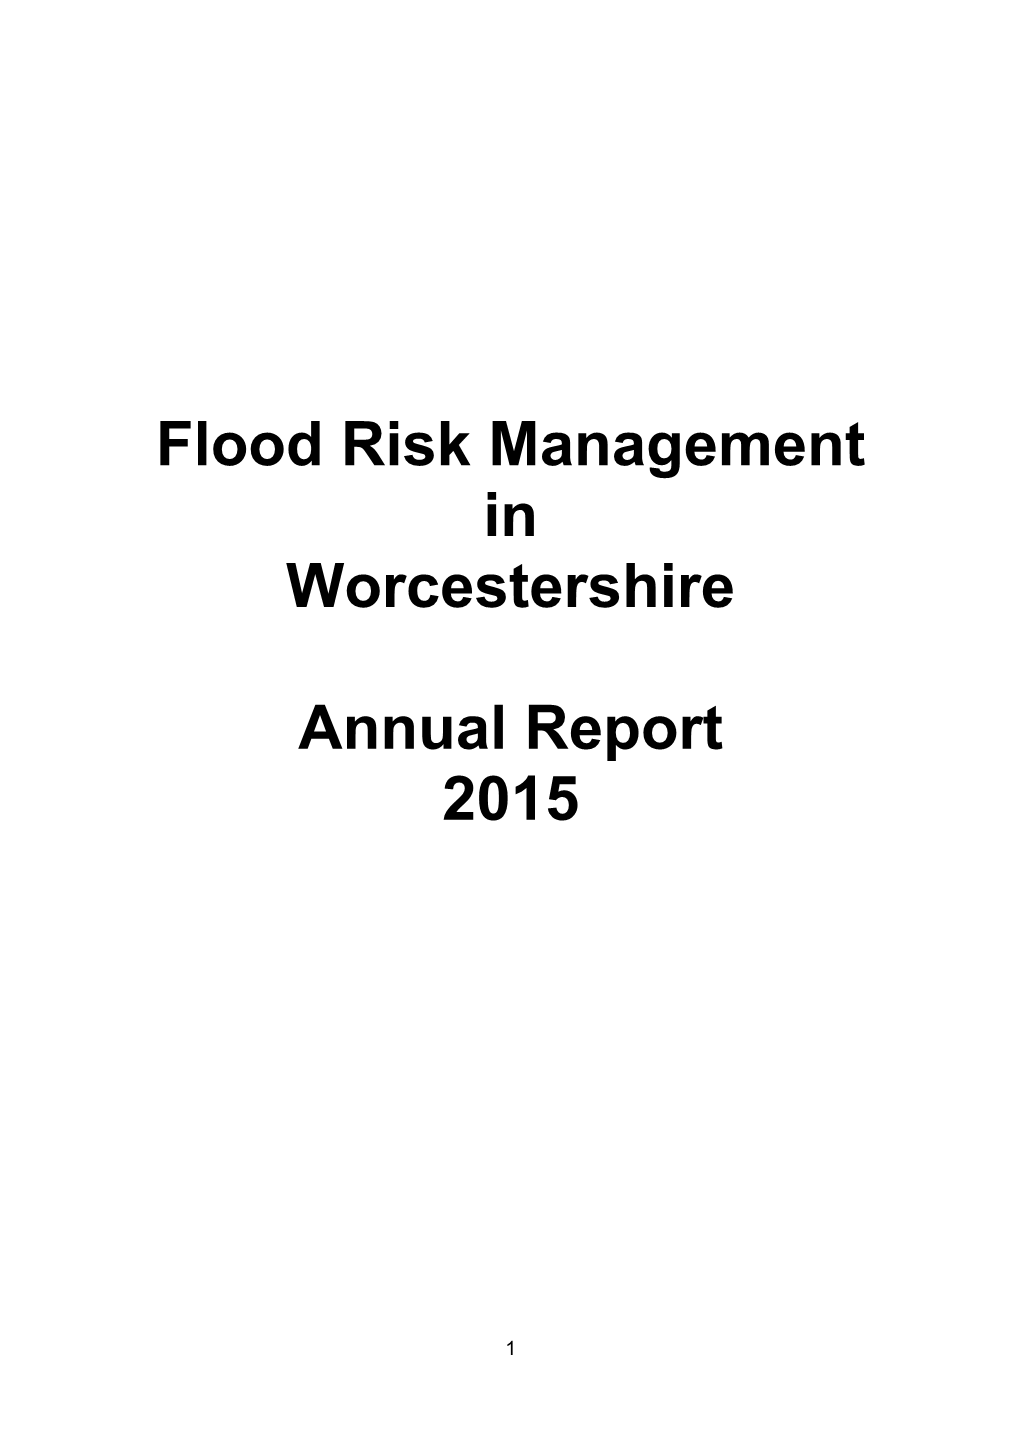 Flood Risk Management in Worcestershire Annual Report 2015